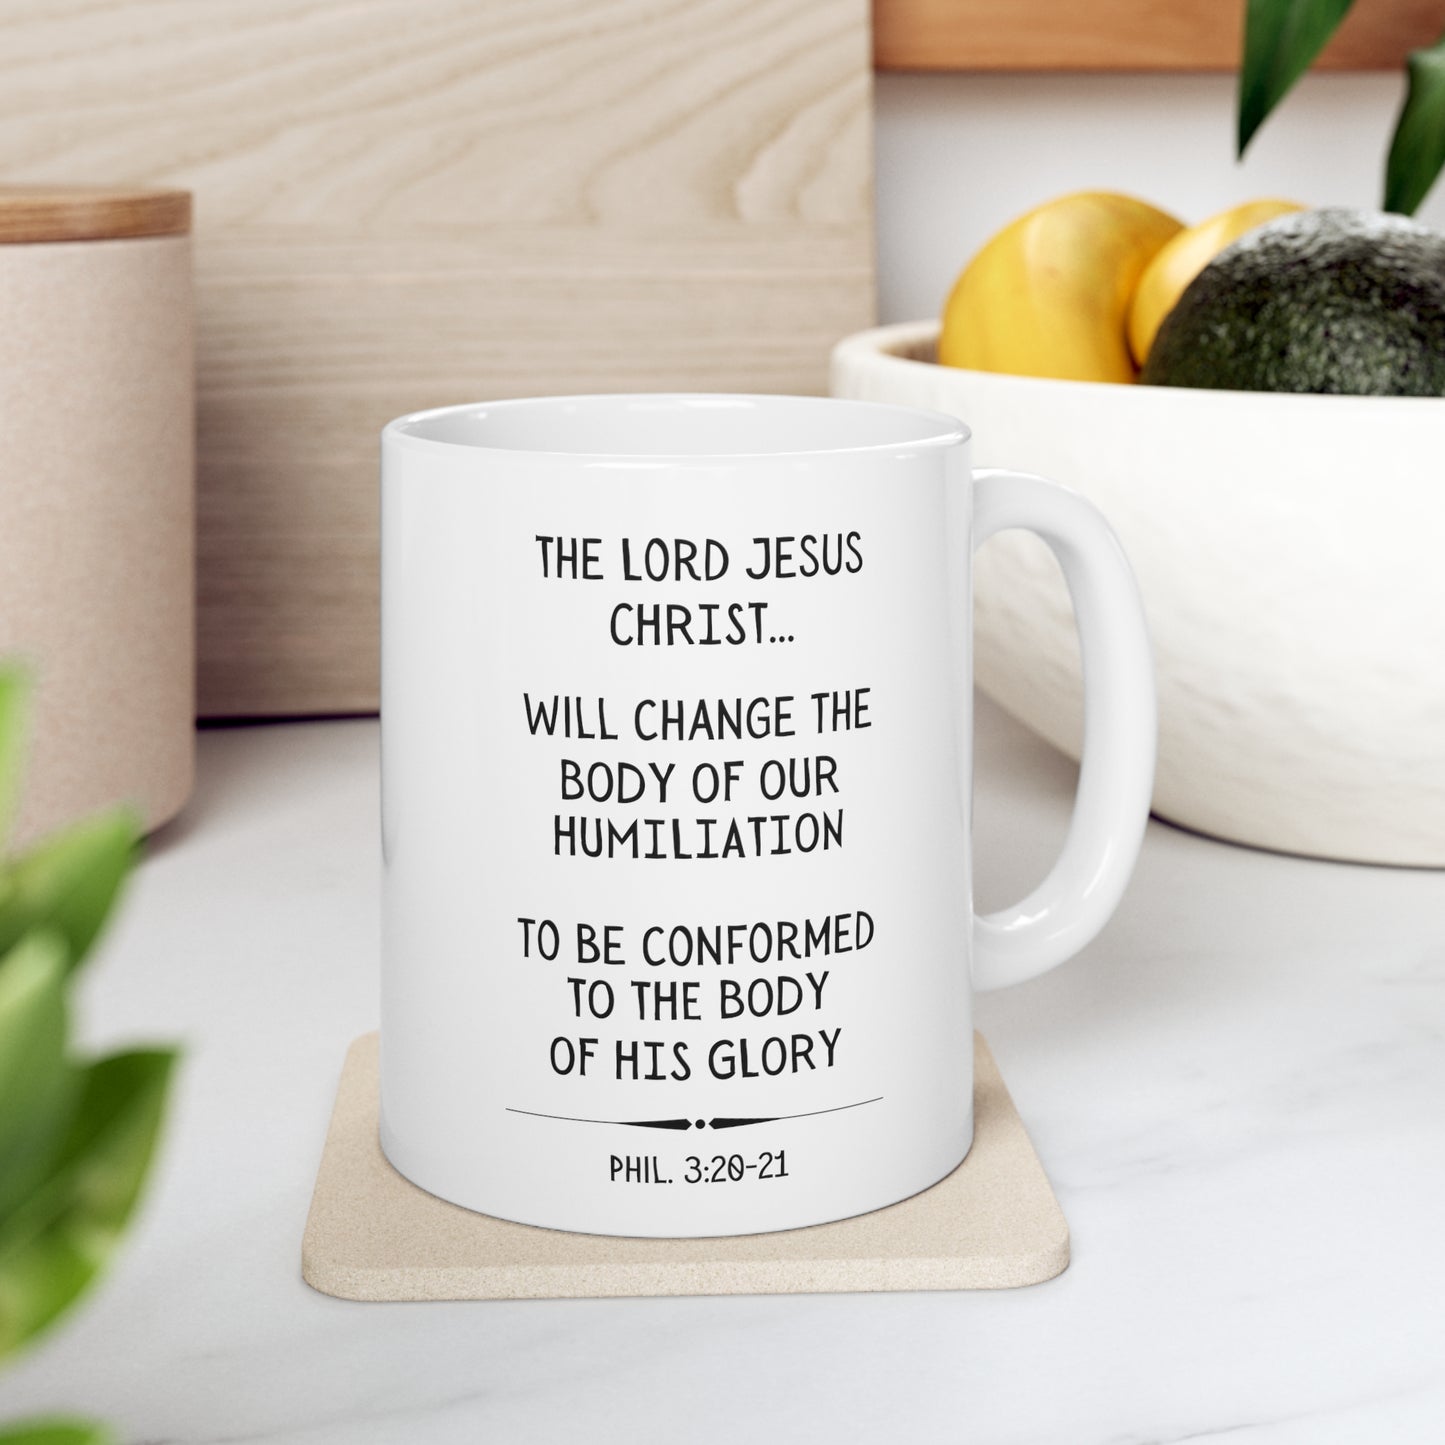 Scripture Mug, Conformed to His Glory, Philippians 3:20-21